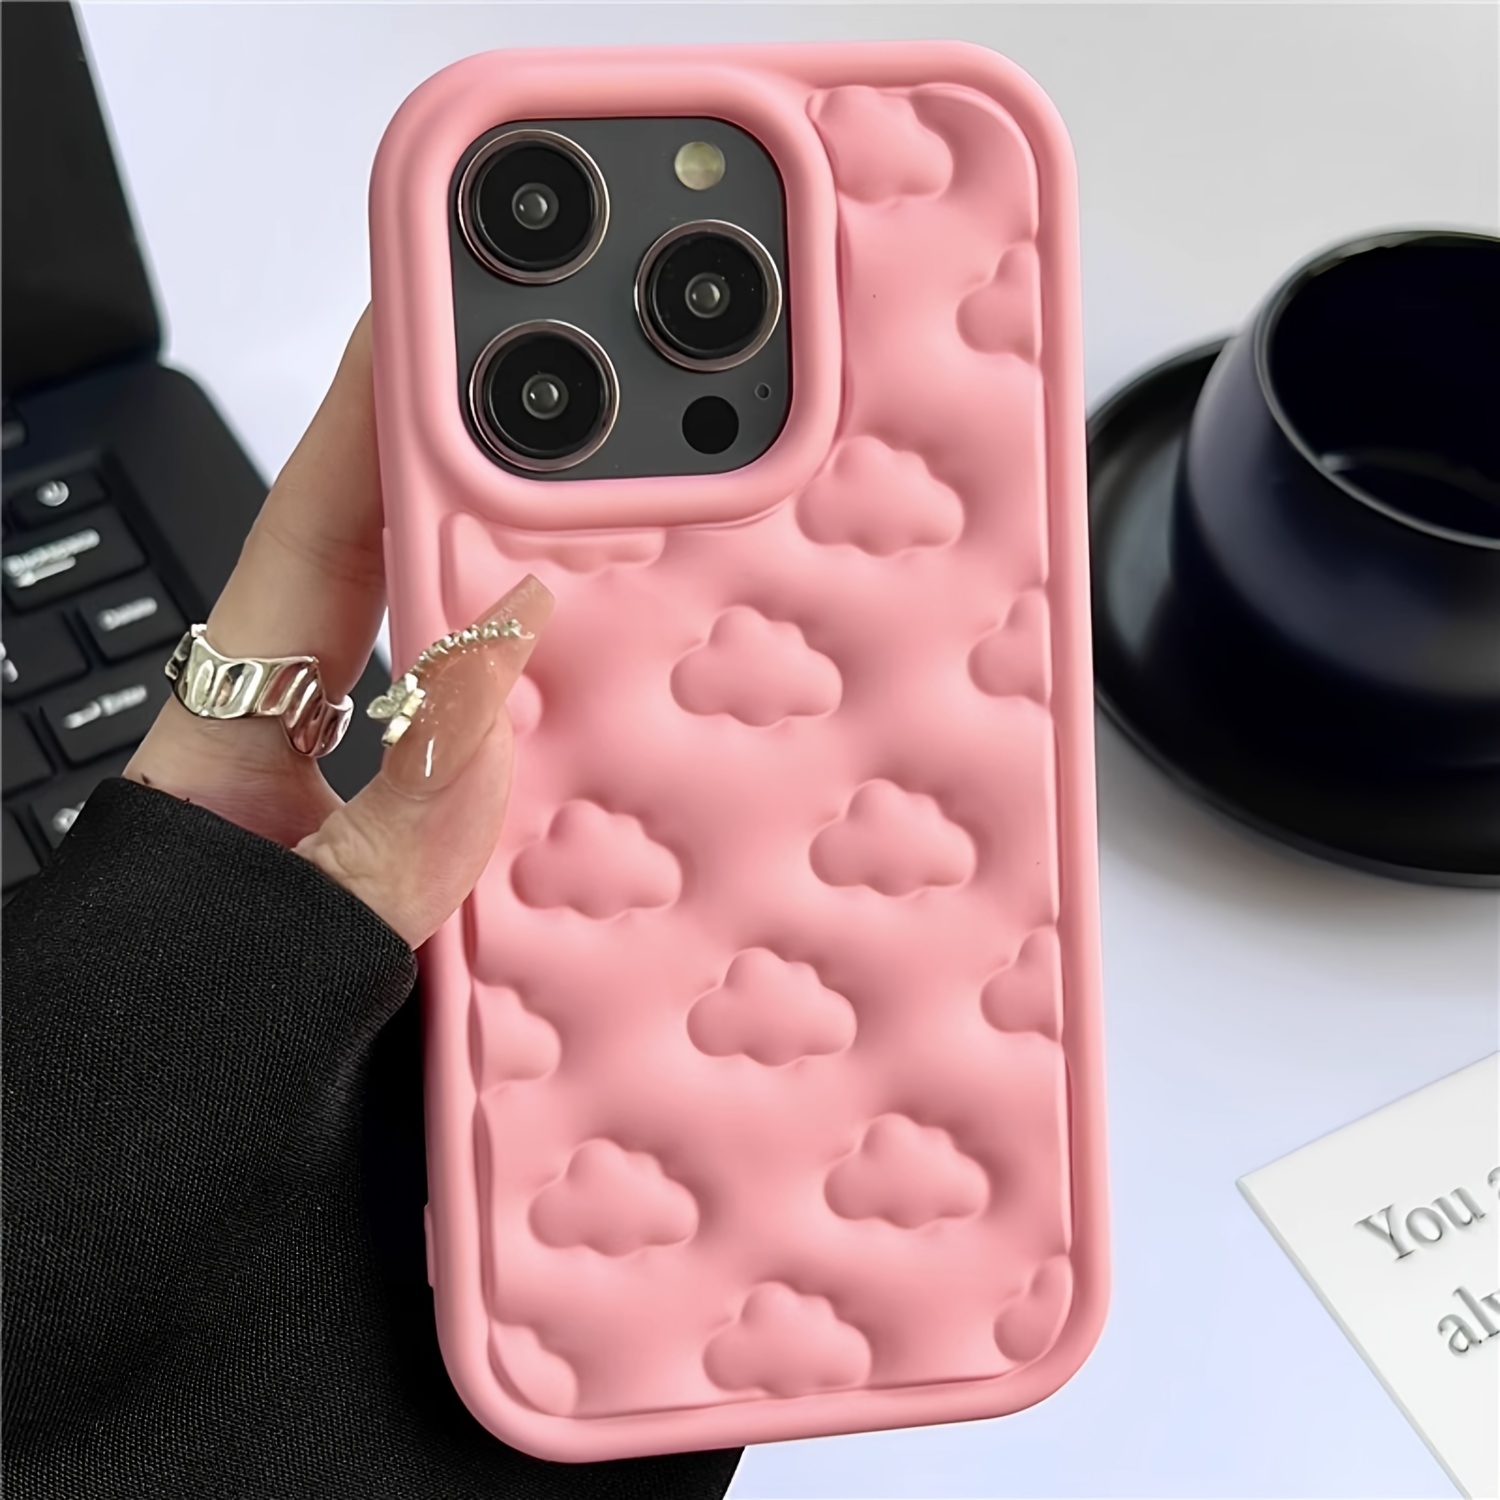 

Graphic Printed Phone Case For 15 14 13 12 11 X Xr Xs 8 7 Mini Plus Pro Max Se, Gift For Easter Day, Christmas Halloween Deco/gift For Girlfriend, Boyfriend, Friend Or Yourself